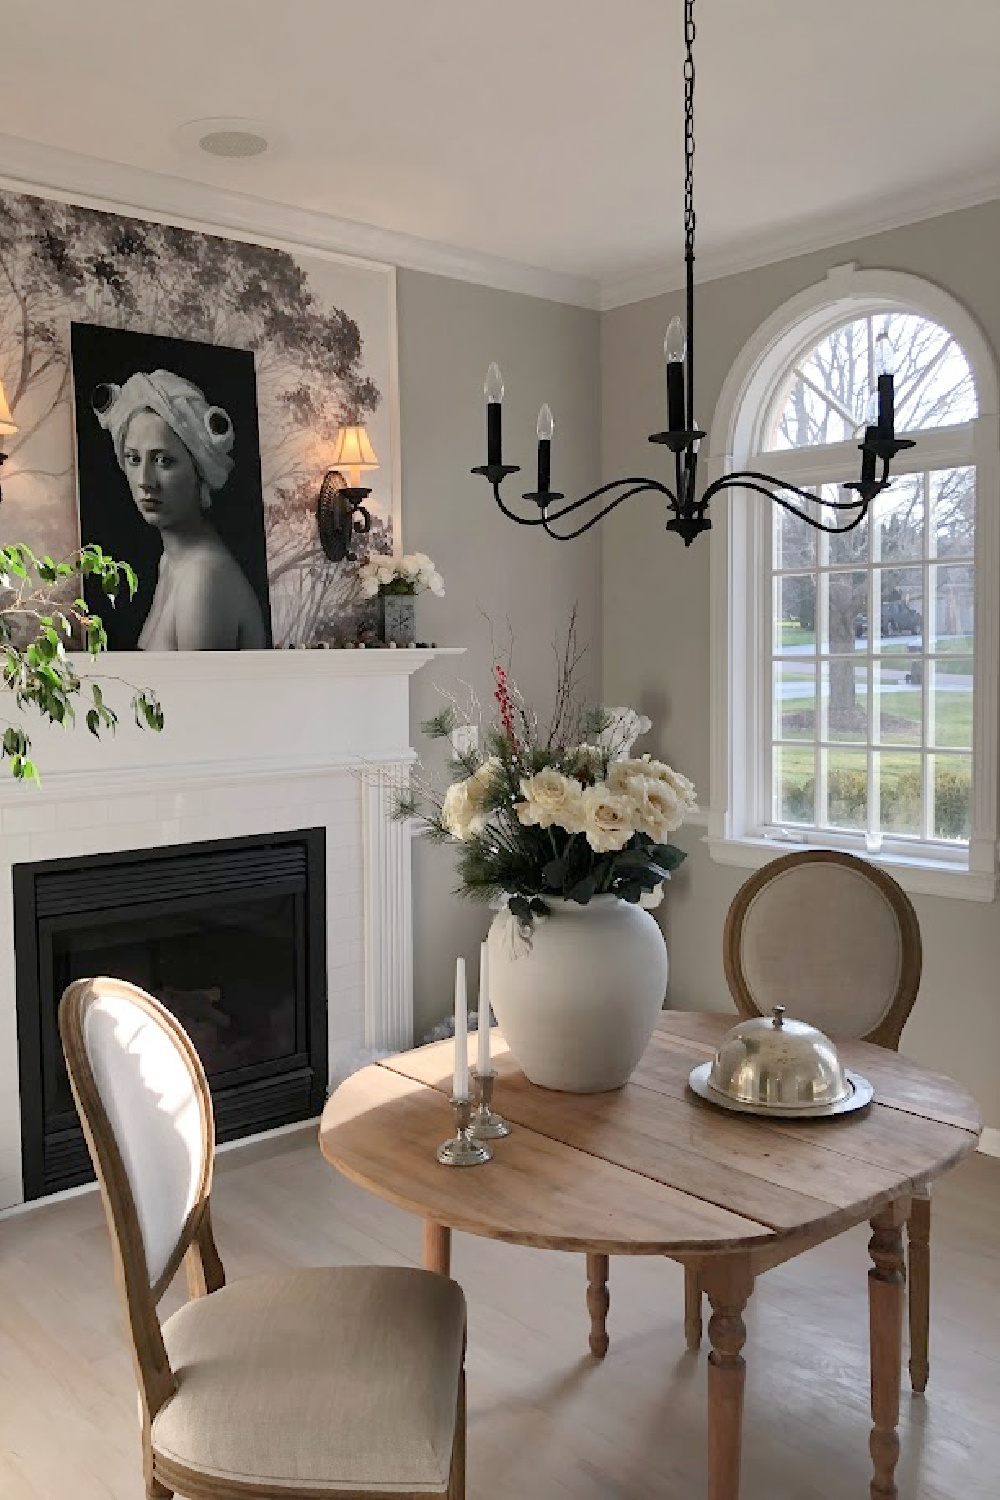 Our dining room with fireplace, white roses, tree wallpaper mural, and Repose Gray (Sherwin-Williams) on walls - Hello Lovely Studio. #modernfrench #diningroom